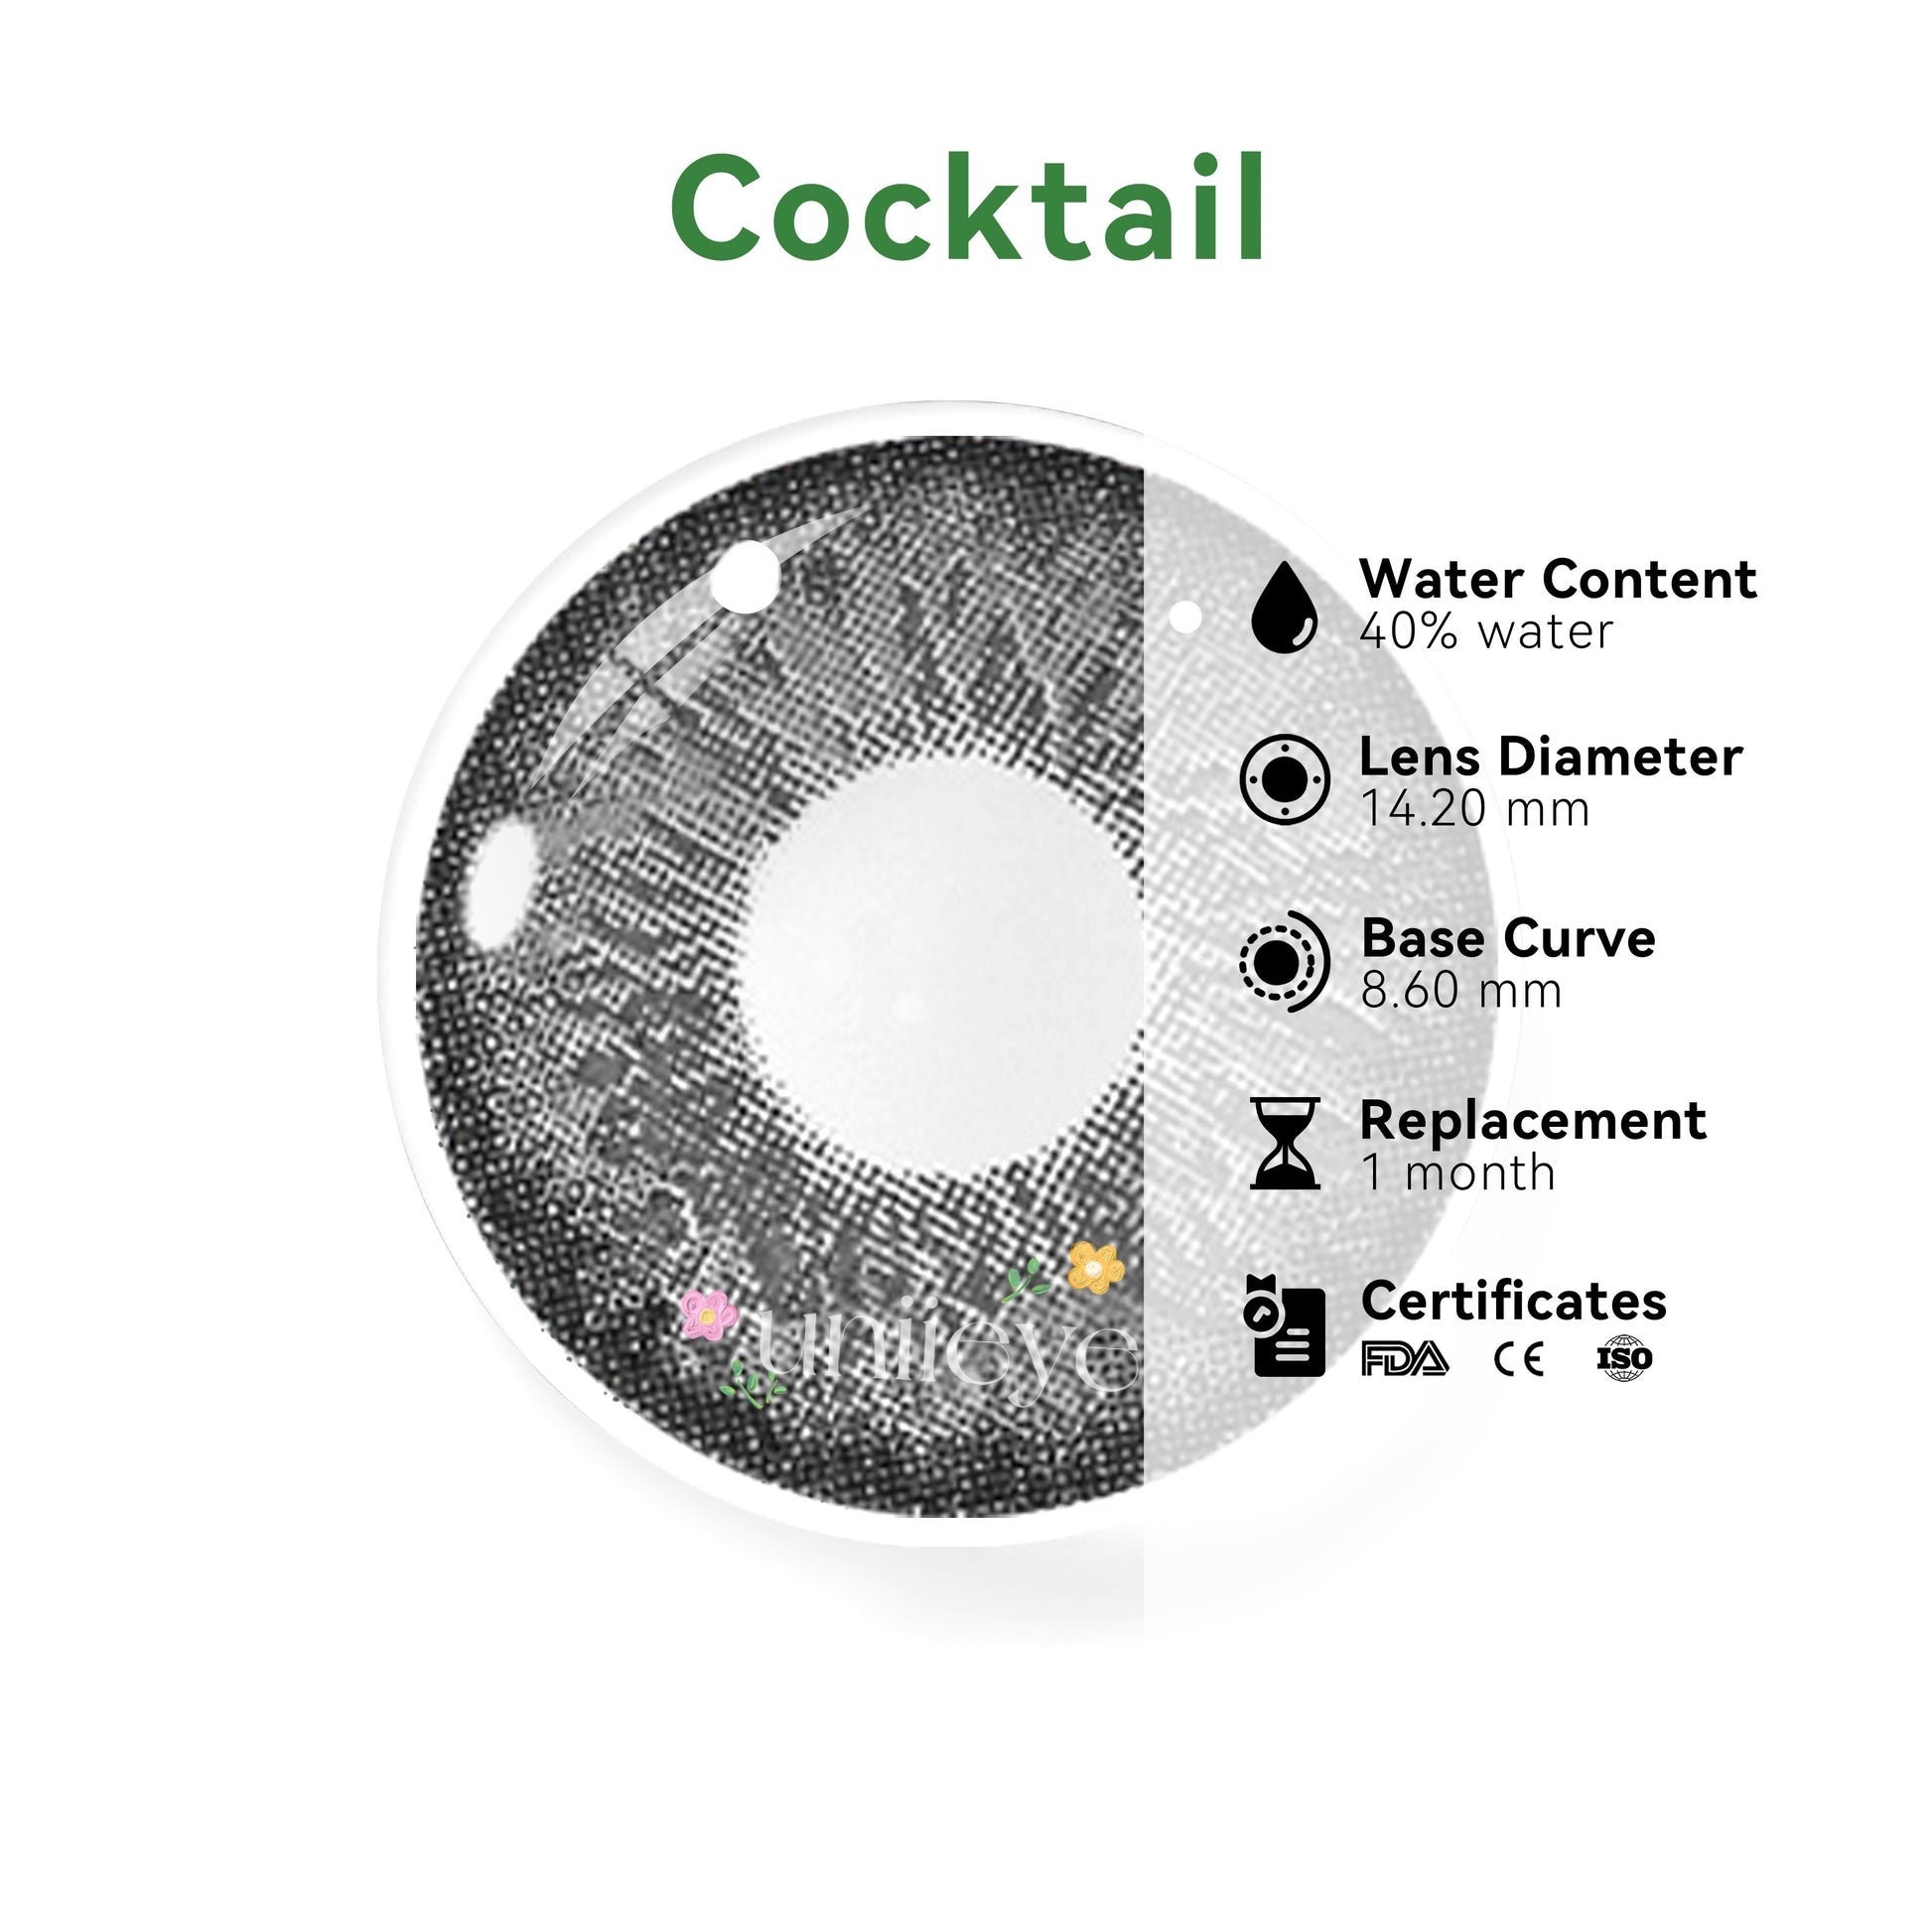 Uniieye Cocktail Vodka Lime Grey Yearly Colored Contacts - Uniieye